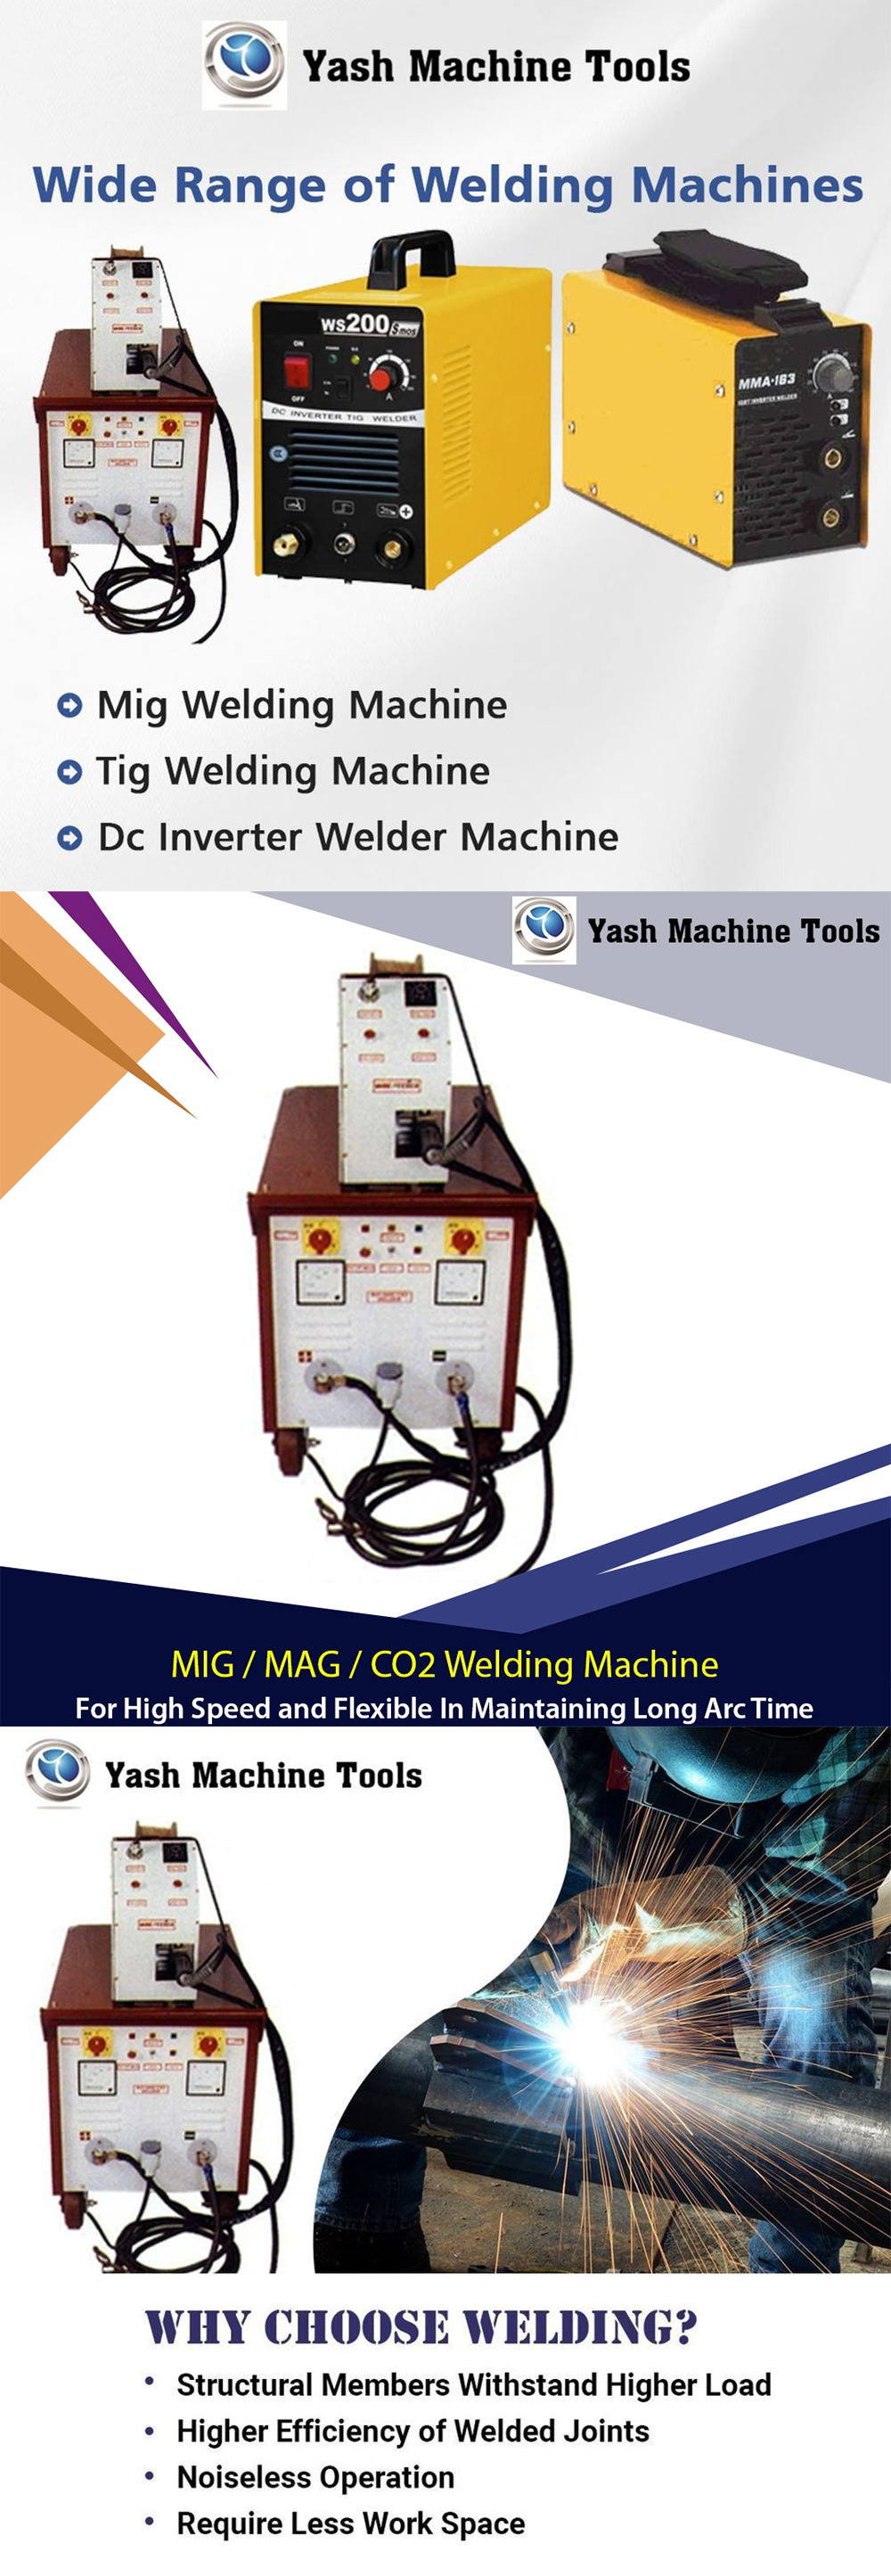 MIG Welding Machine - Important Entity in the Welding Industry